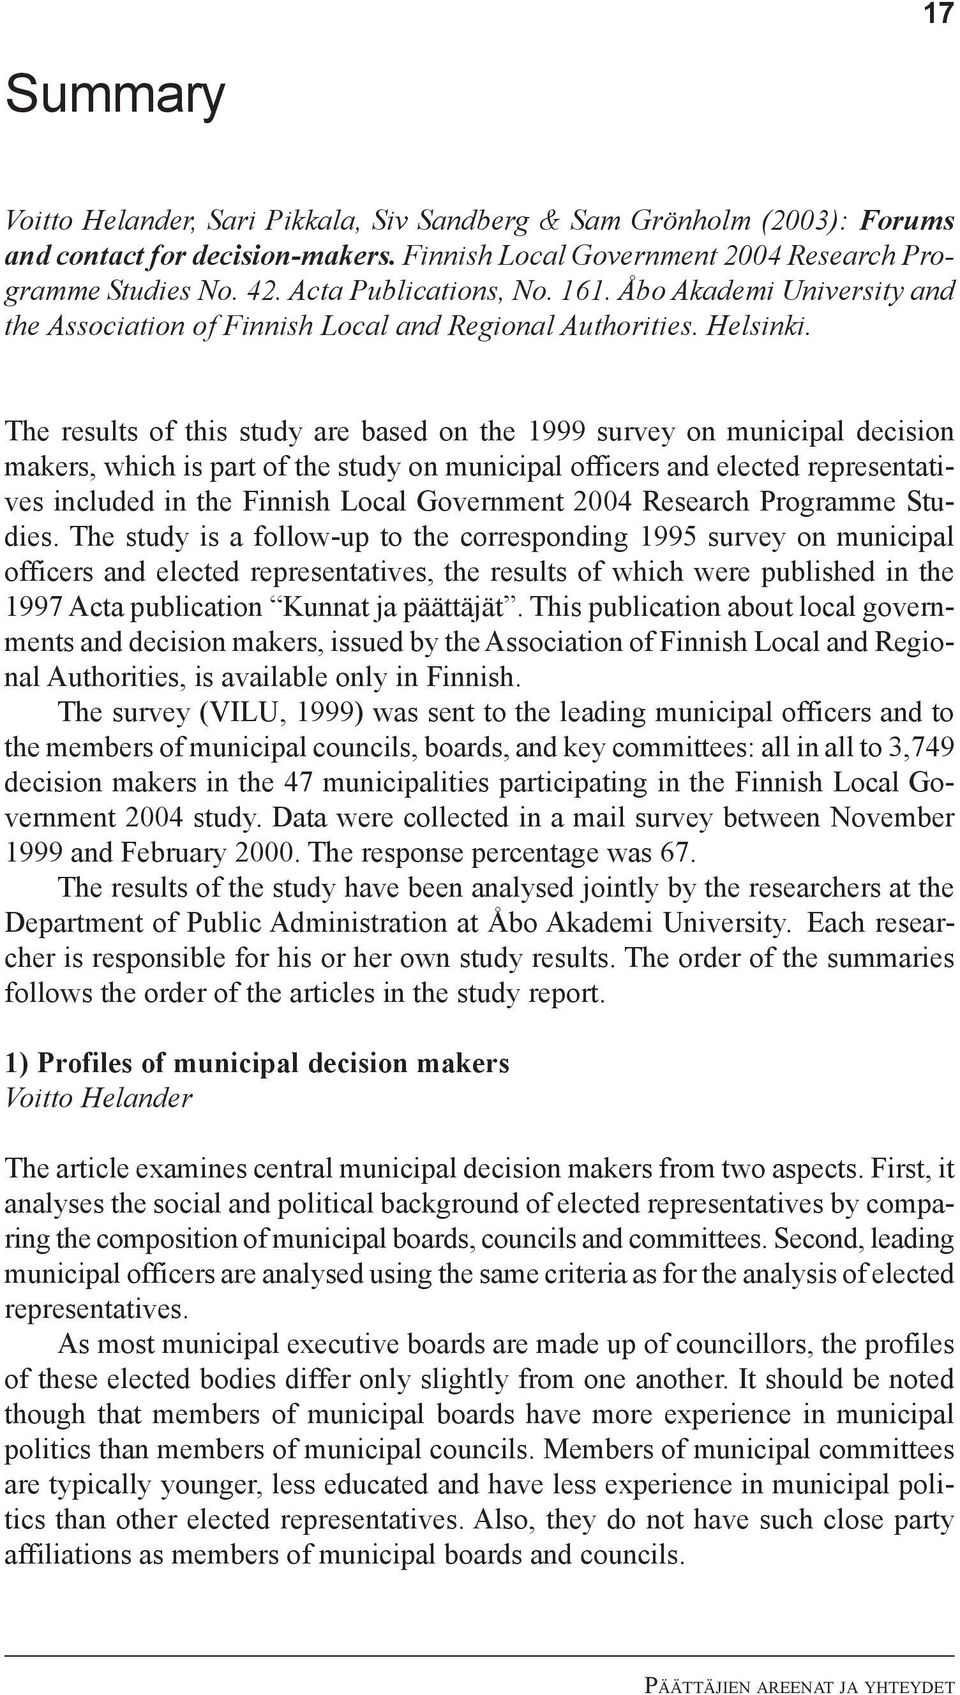 The results of this study are based on the 1999 survey on municipal decision makers, which is part of the study on municipal officers and elected representatives included in the Finnish Local